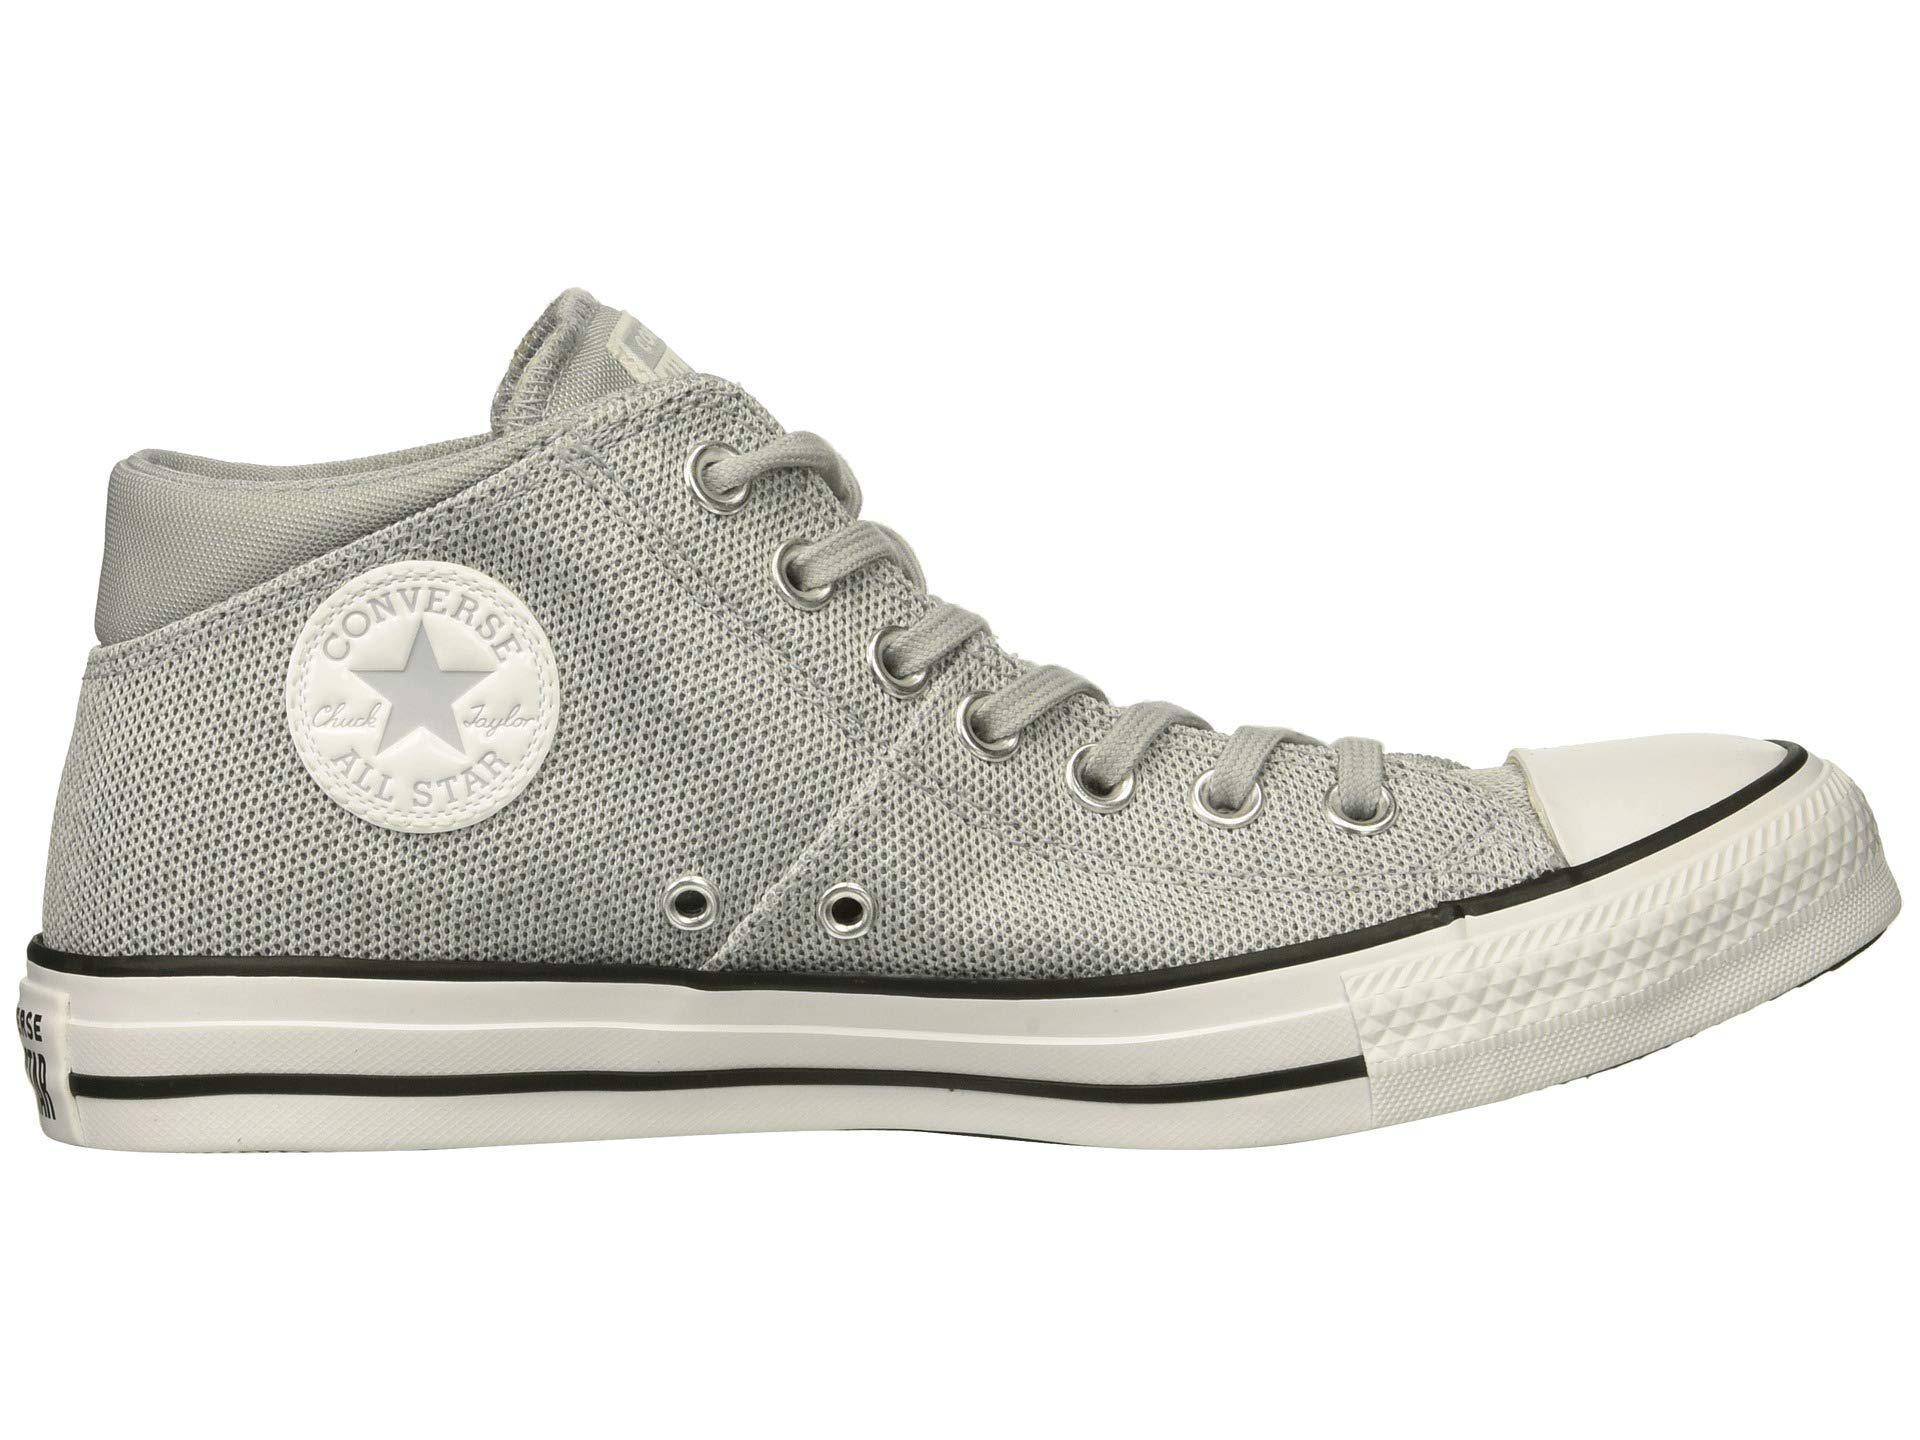 Converse Chuck Taylor All Star Madison High Top Sneakers in Gray | Lyst